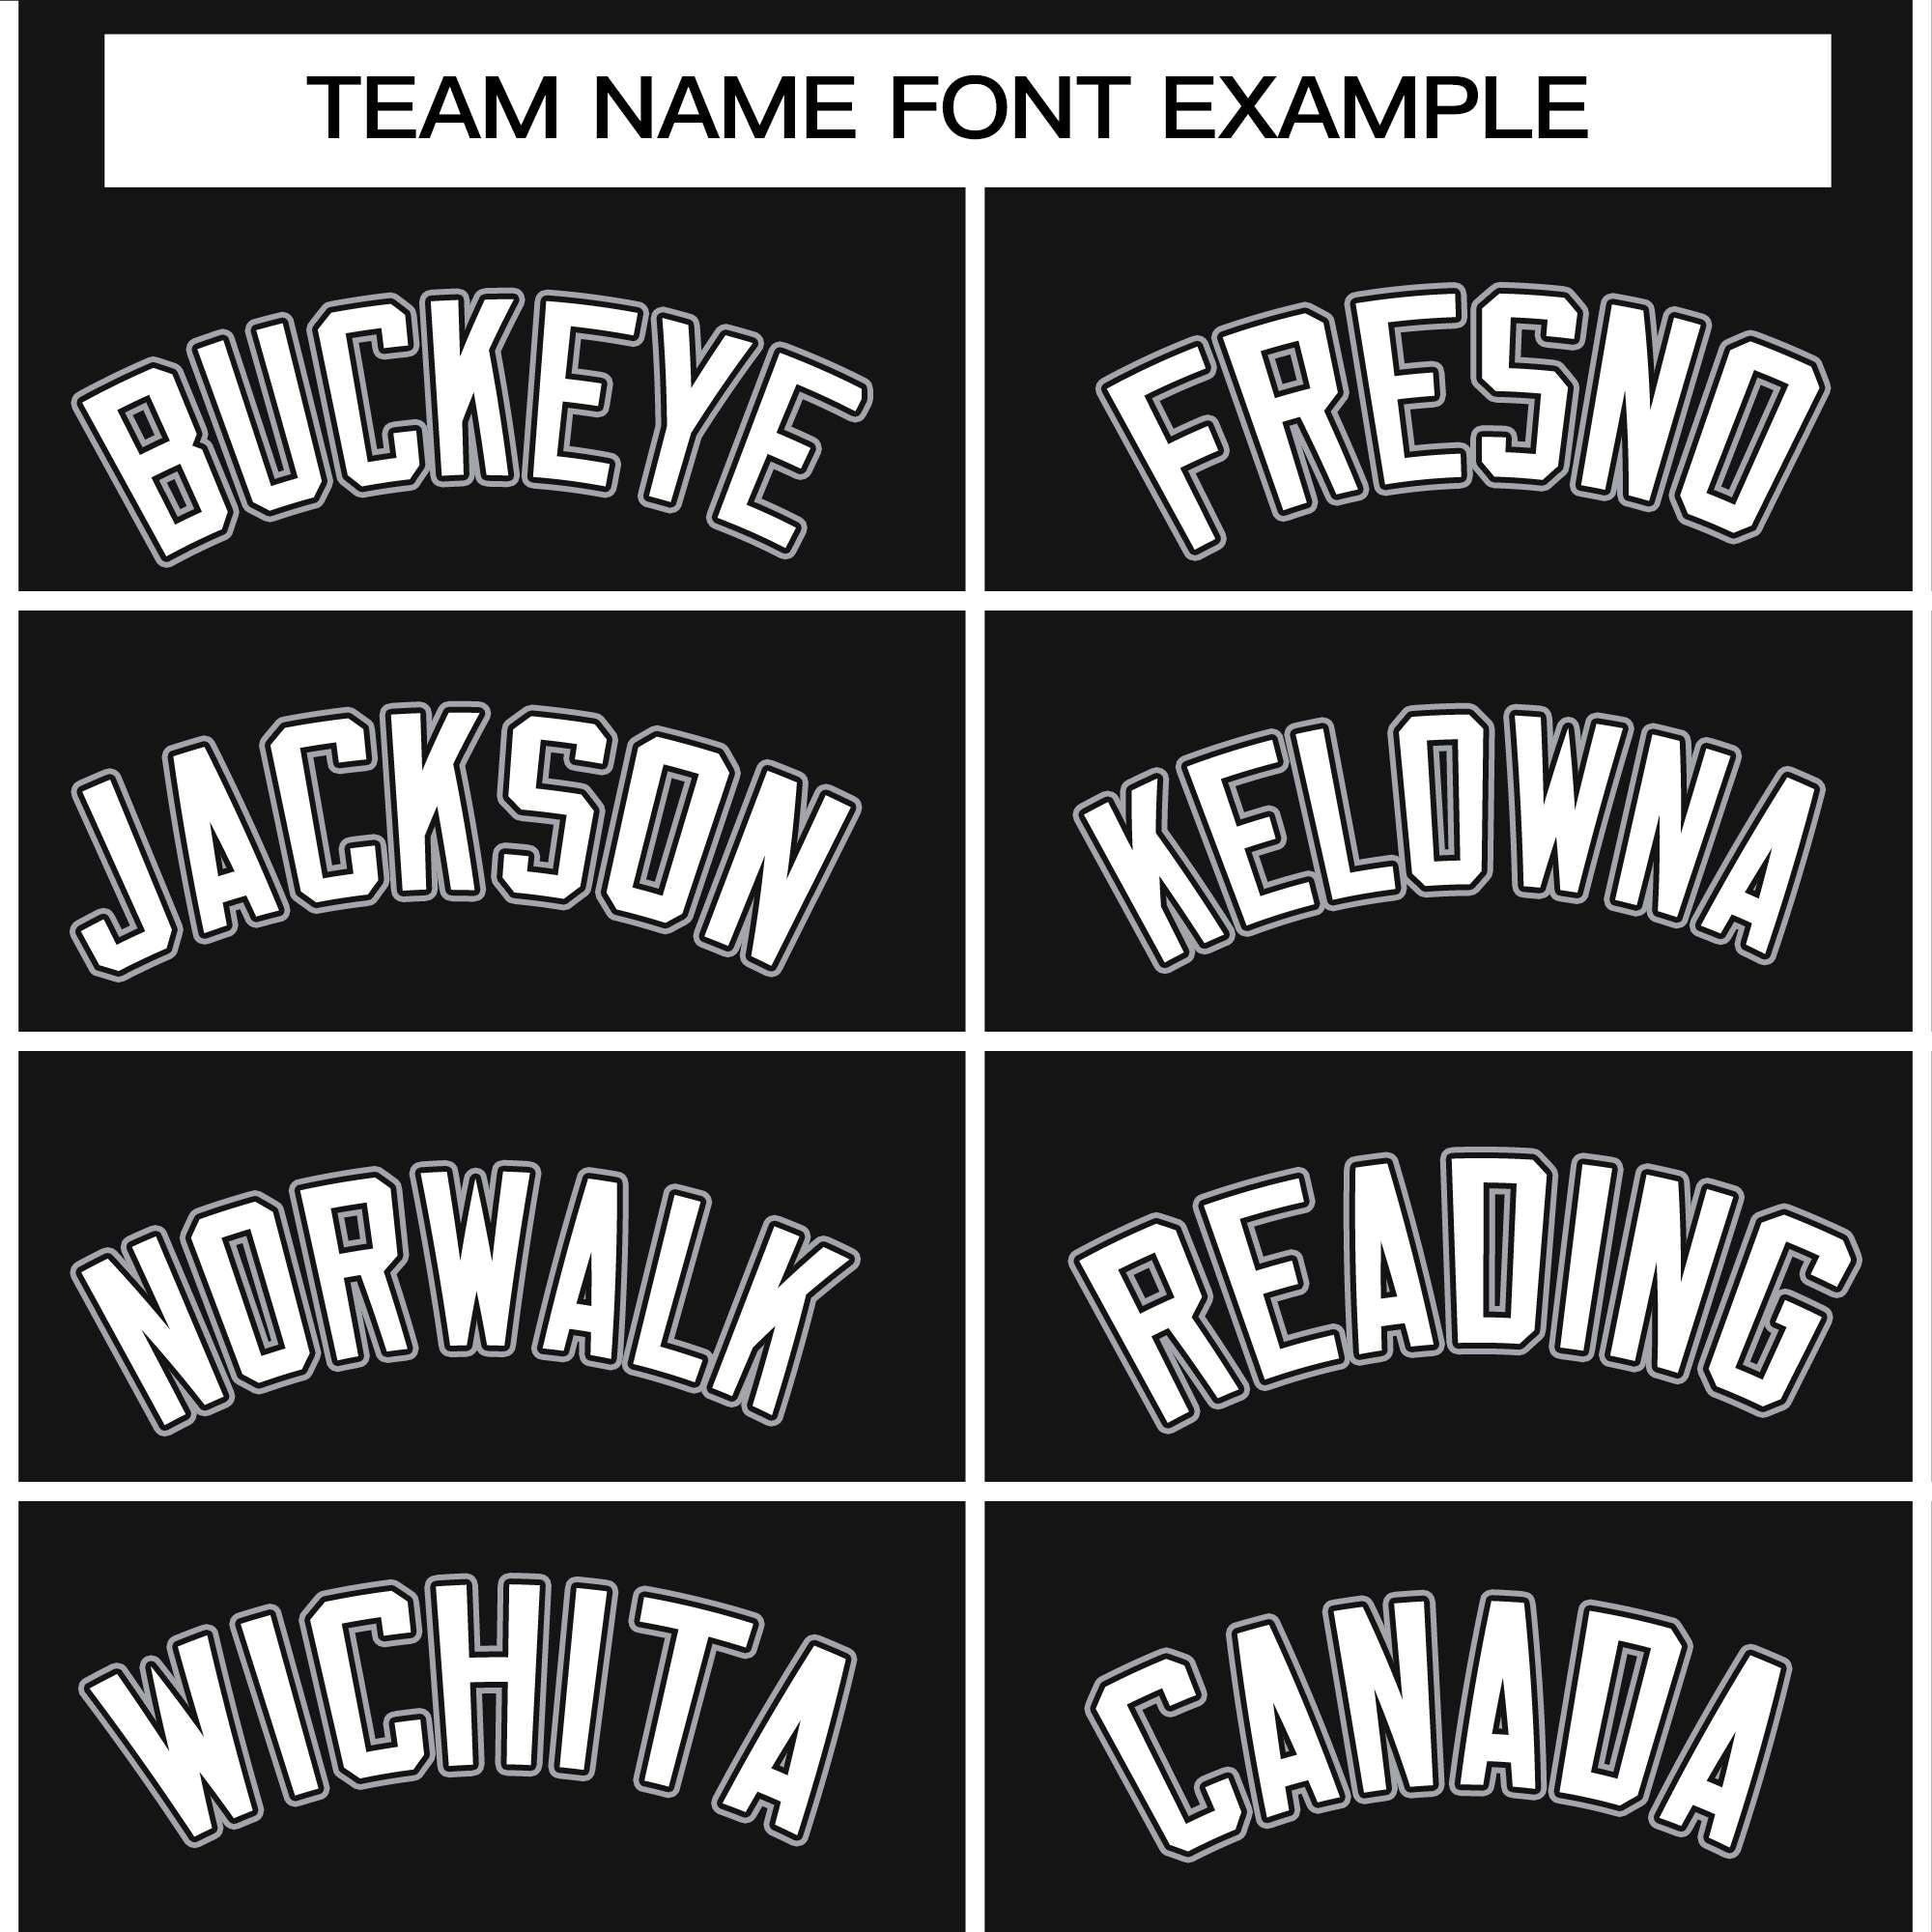 custom pullover hoodies outfit team name font example